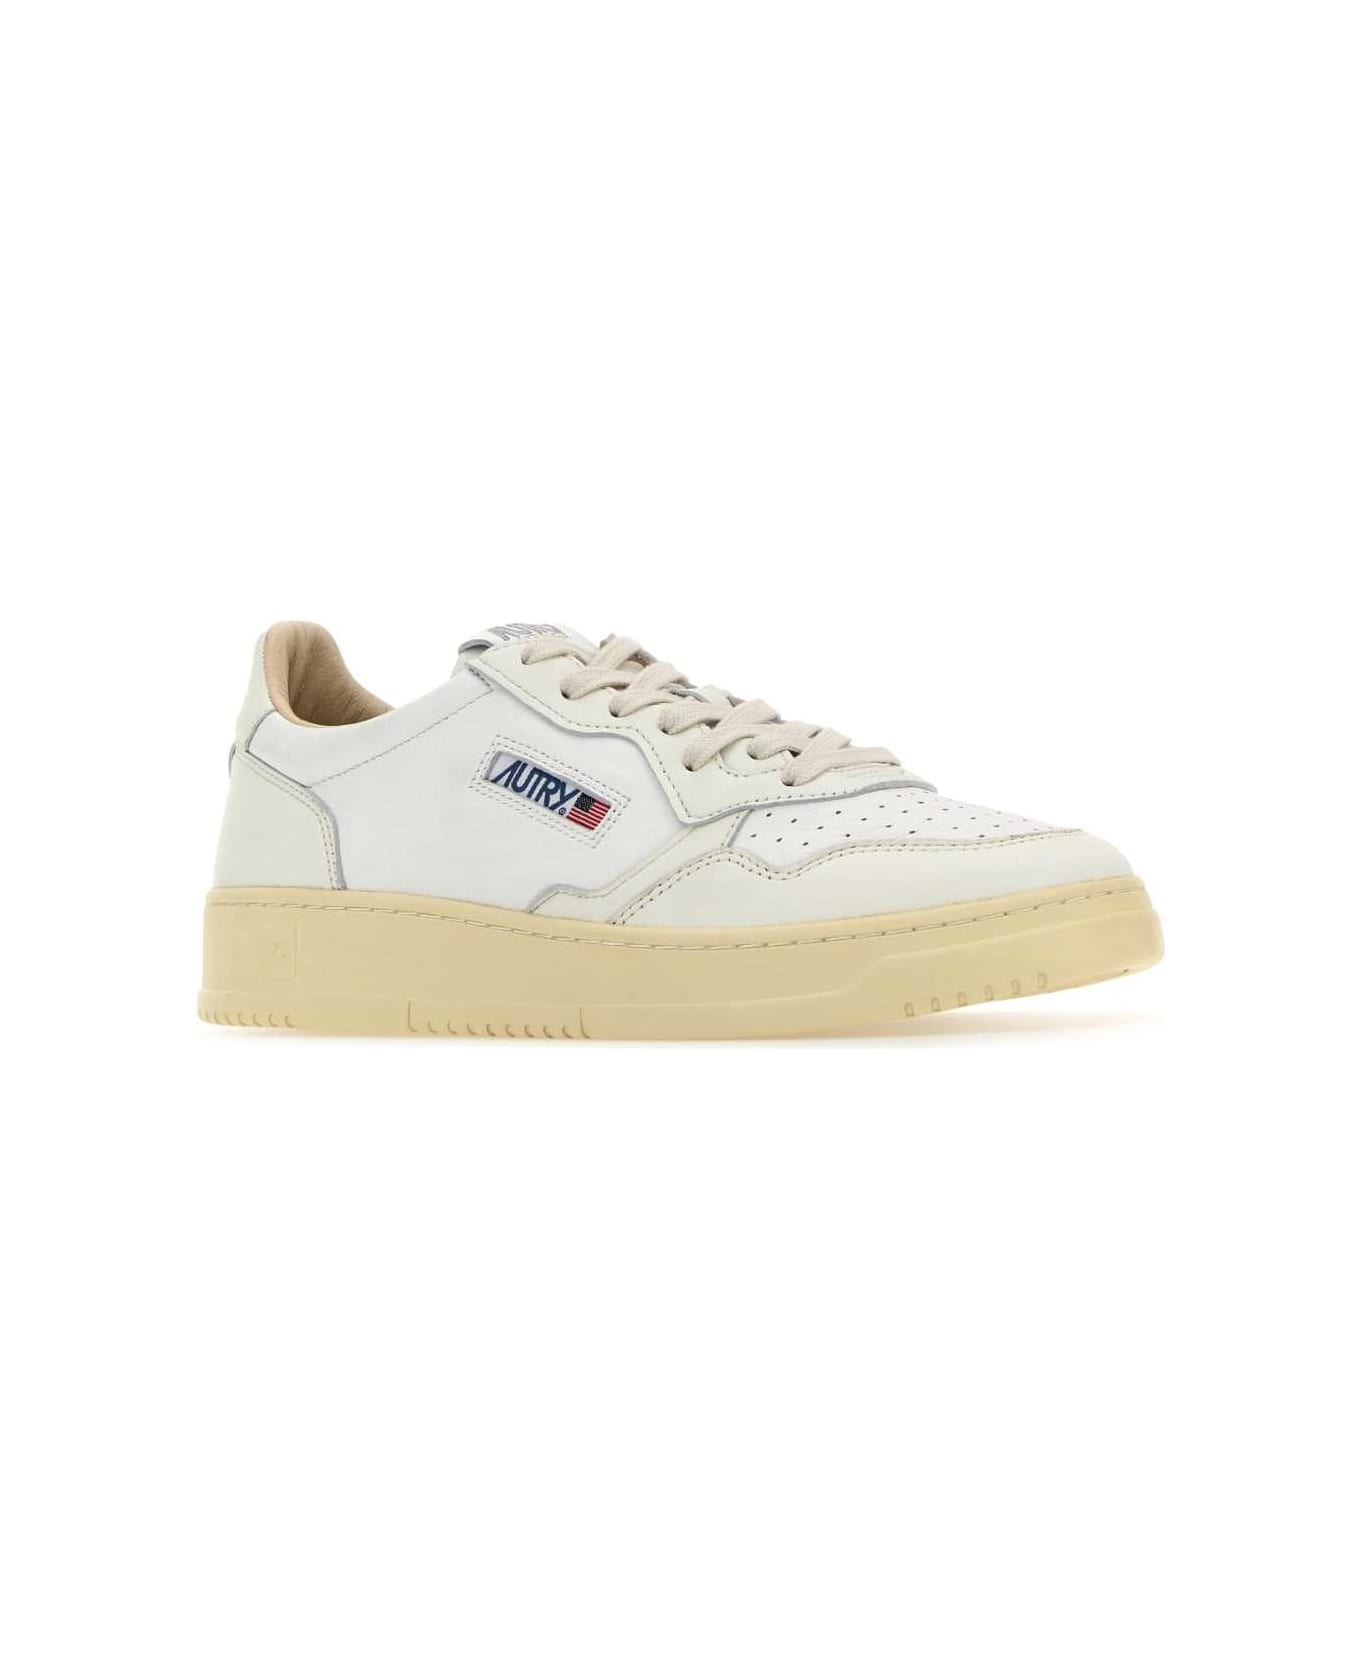 Autry White Leather Medalist Sneakers - GH01